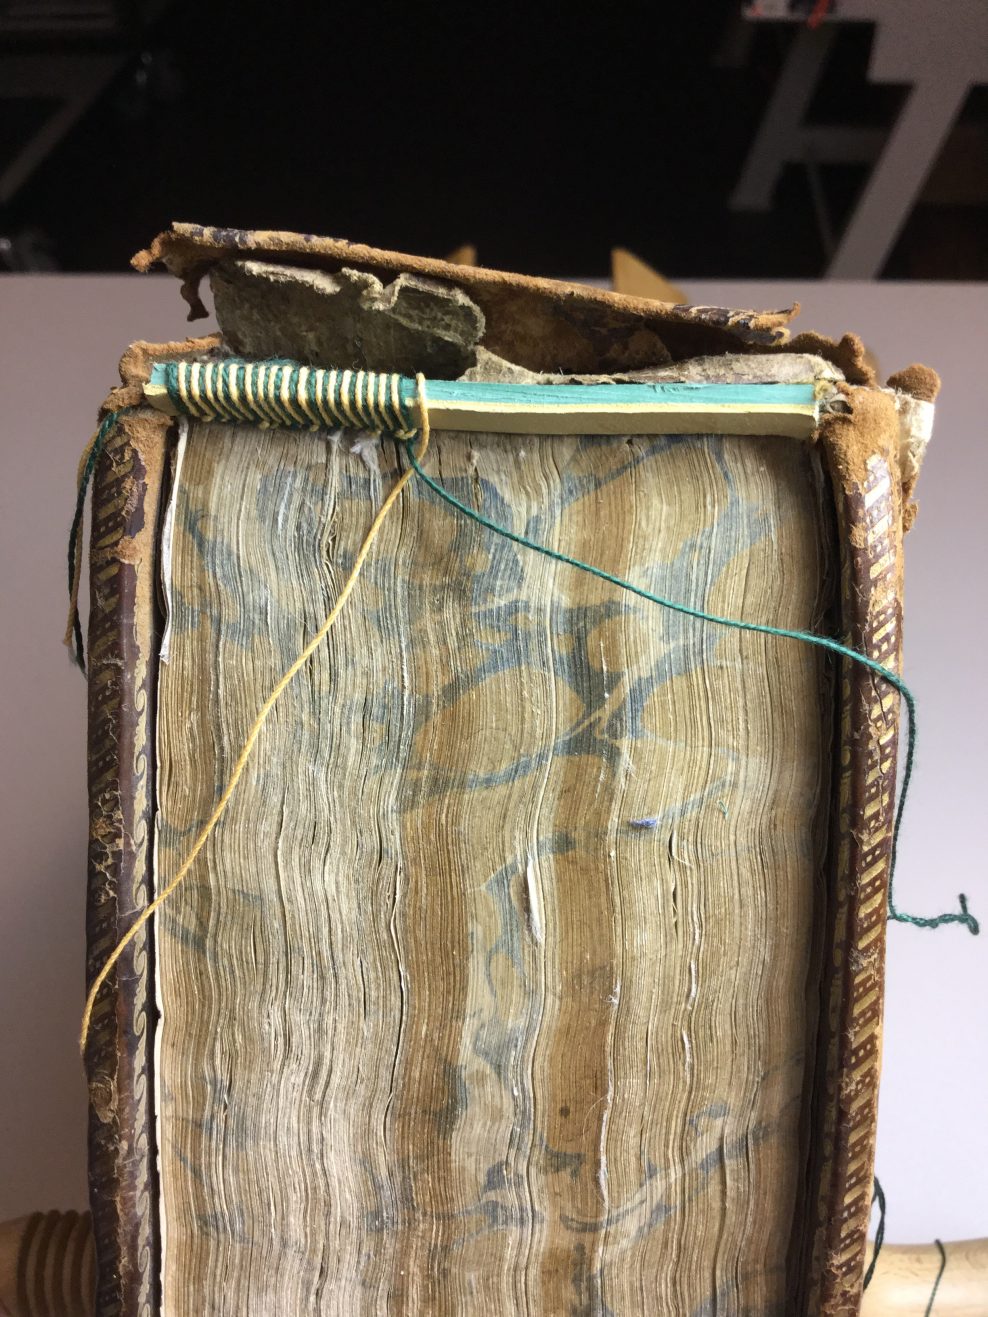 Book of common prayer psalms. Church of England 1681. A book conservation project for the Church of Ireland, Dublin